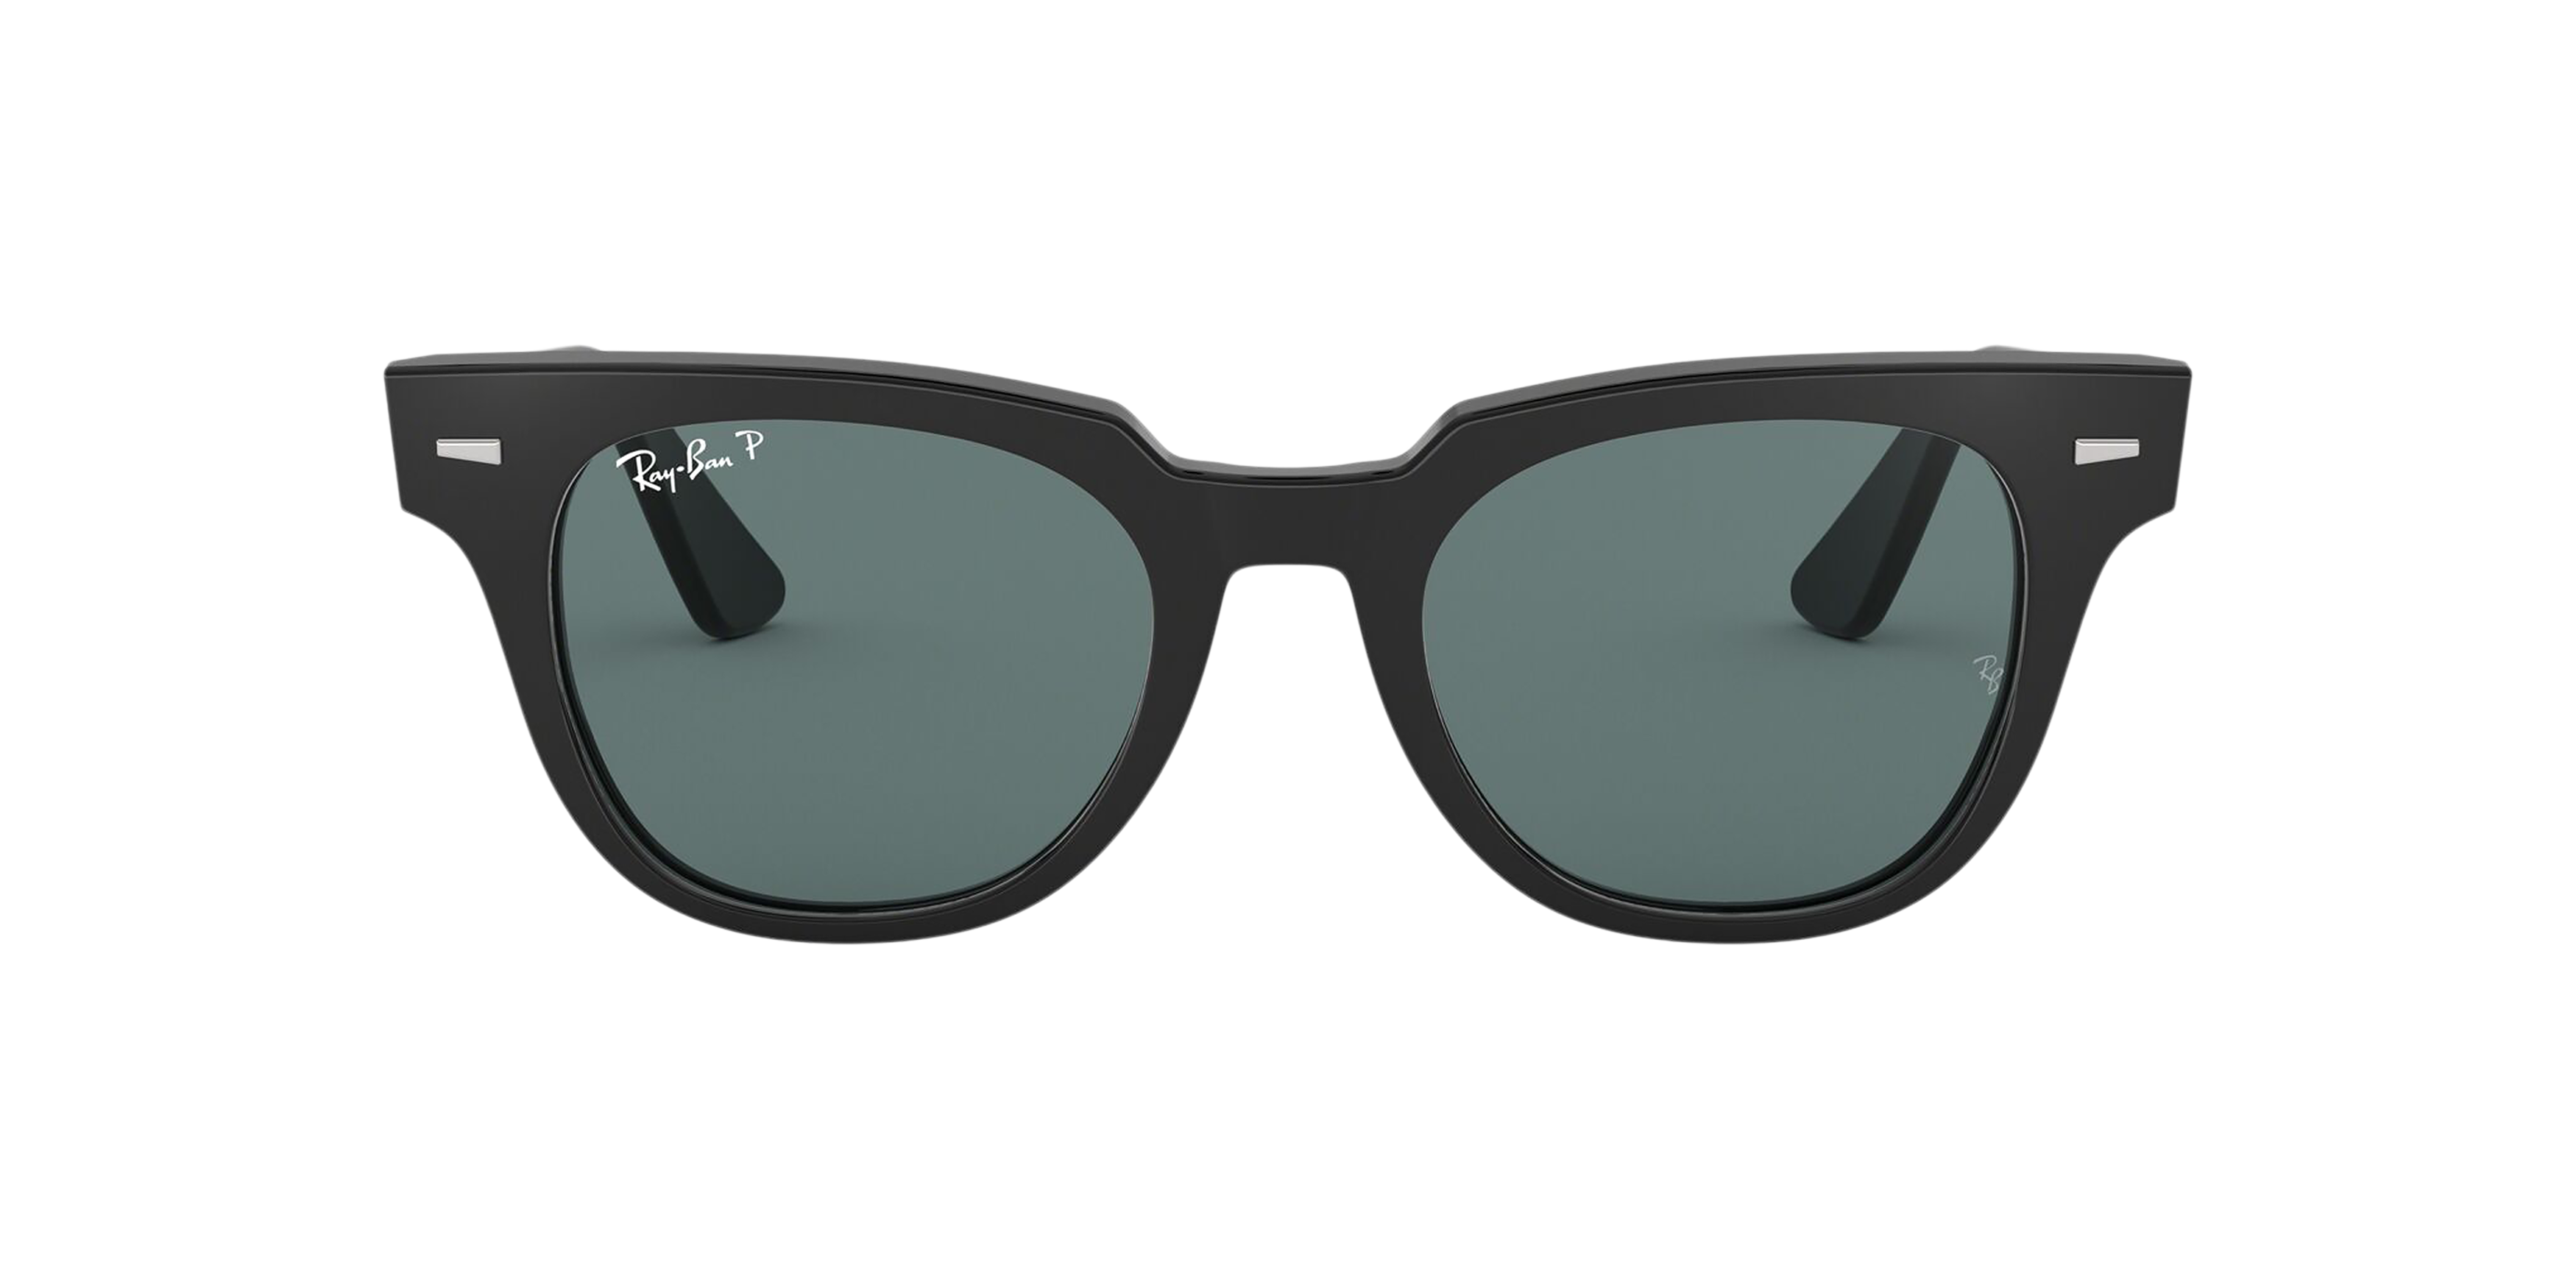 [products.image.front] Ray-Ban Meteor Classic RB2168 901/52